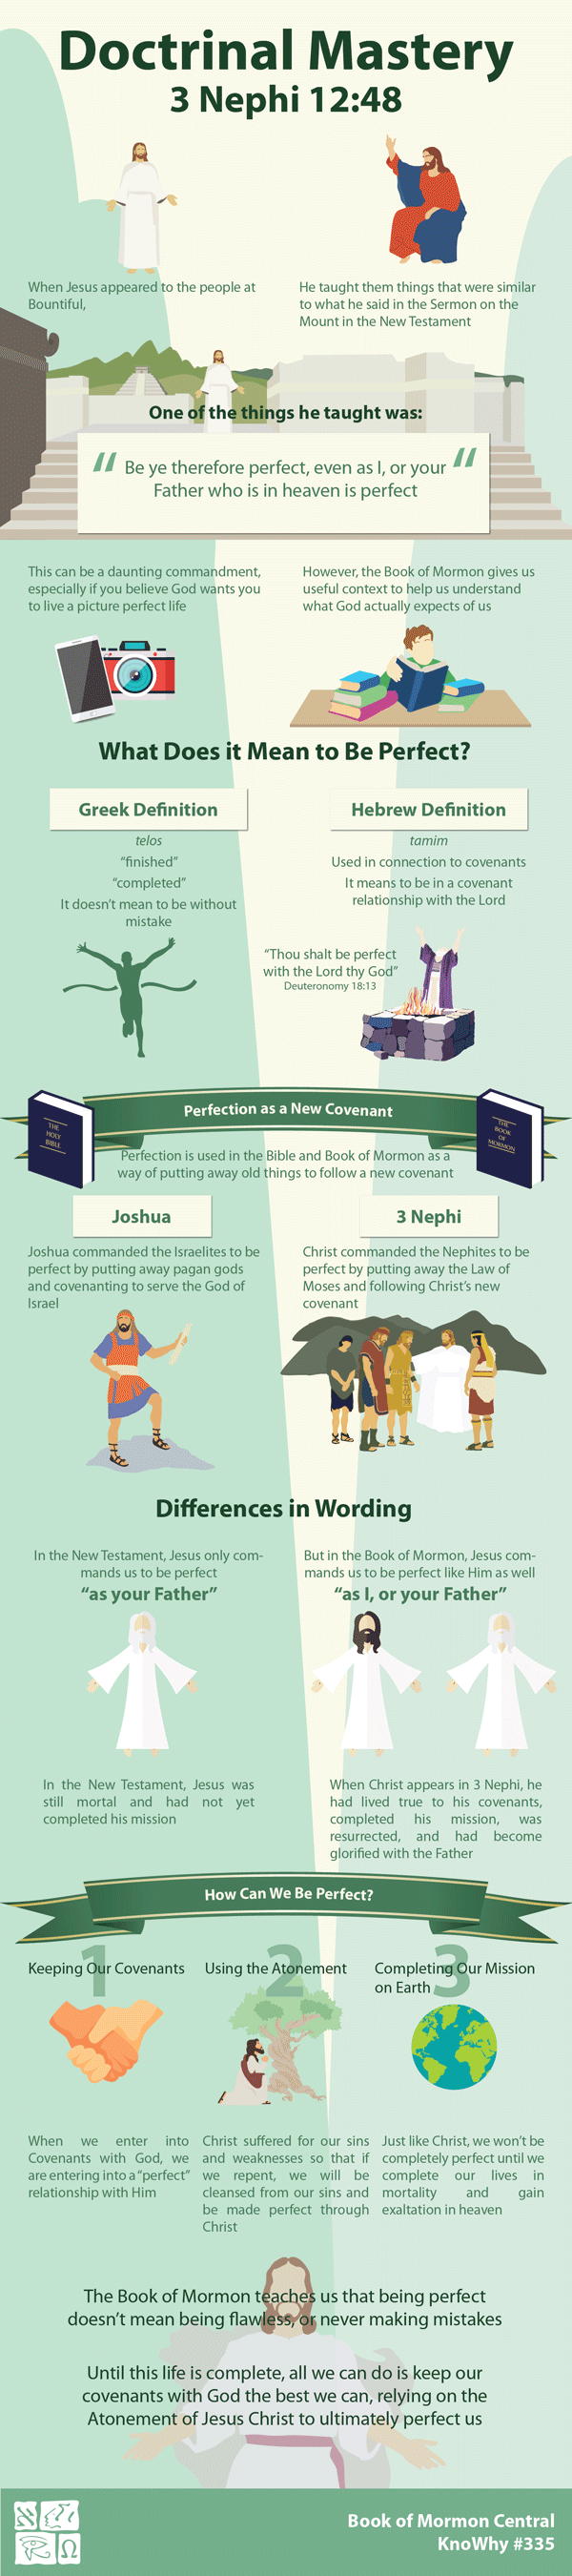 Doctrinal Mastery 3 Nephi 12:48 Infographic by Book of Mormon Central